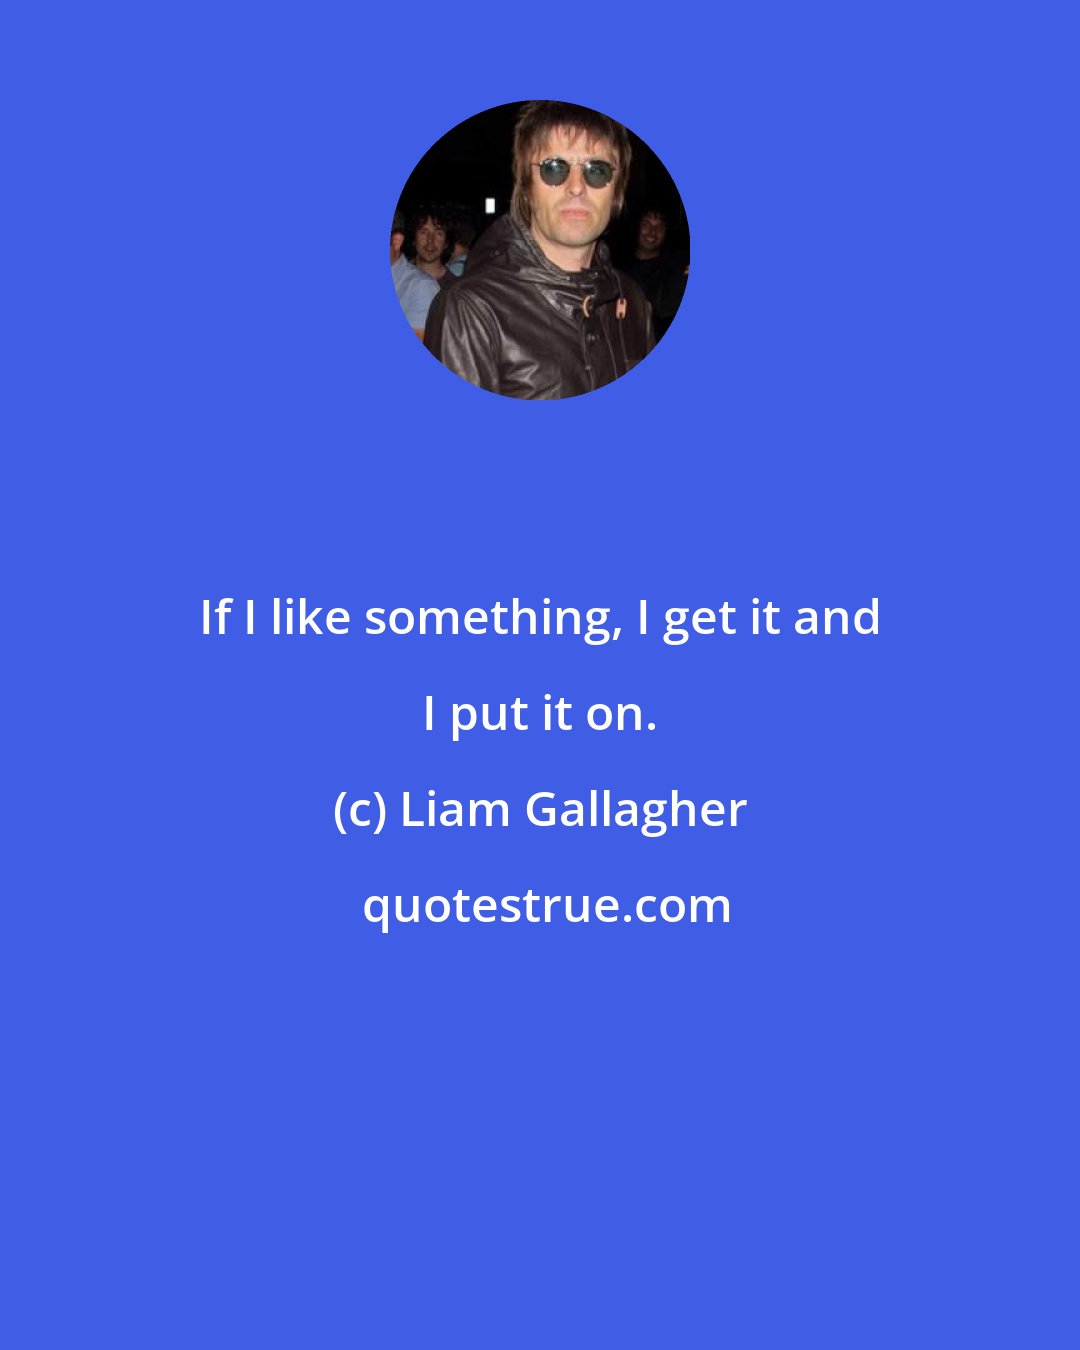 Liam Gallagher: If I like something, I get it and I put it on.